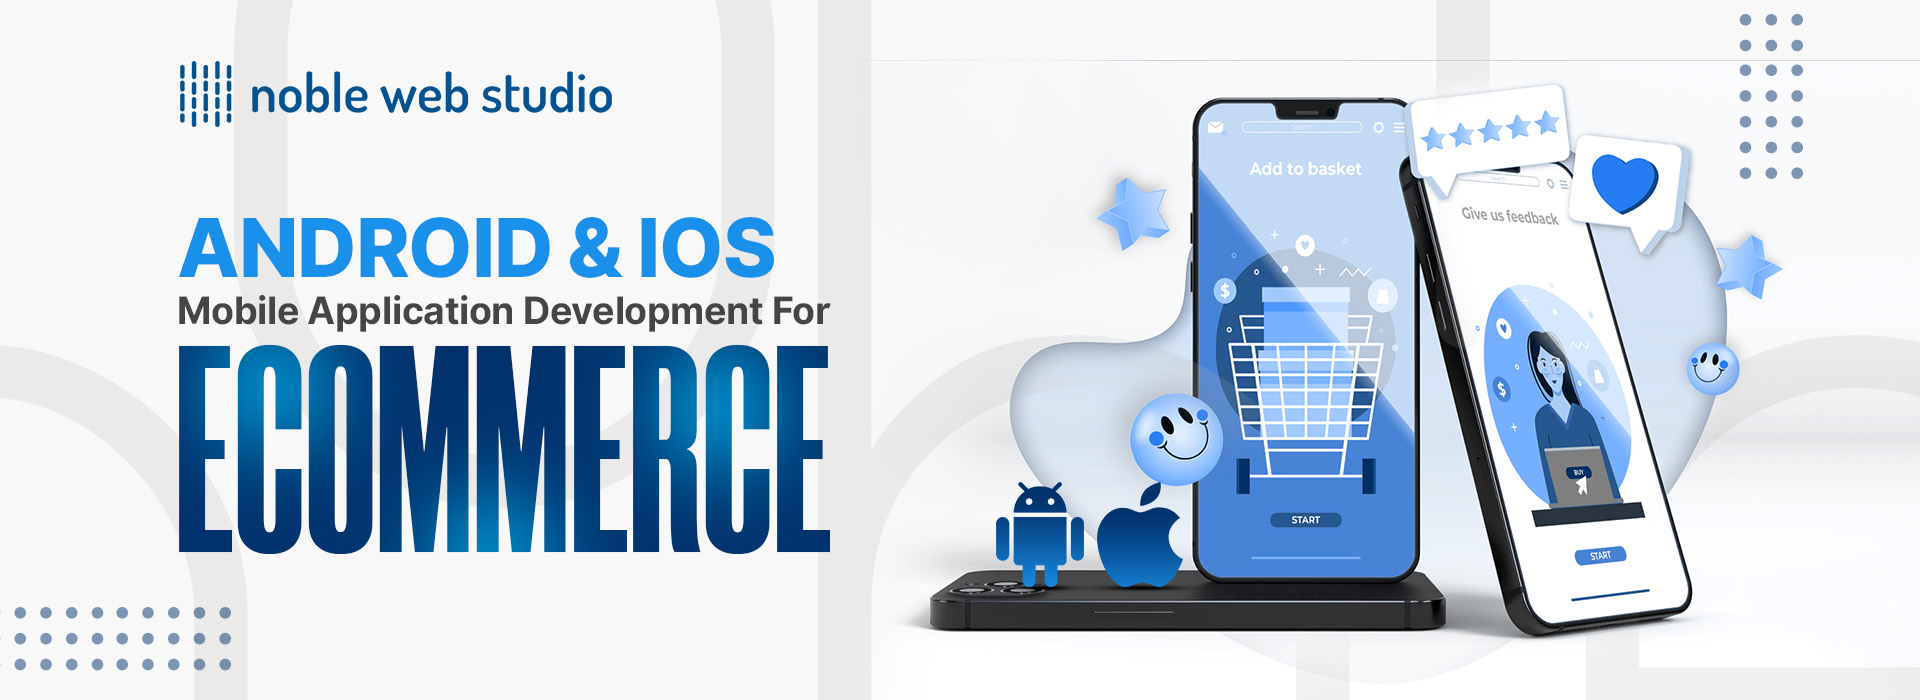 Android & iOS Mobile Application Development For eCommerce